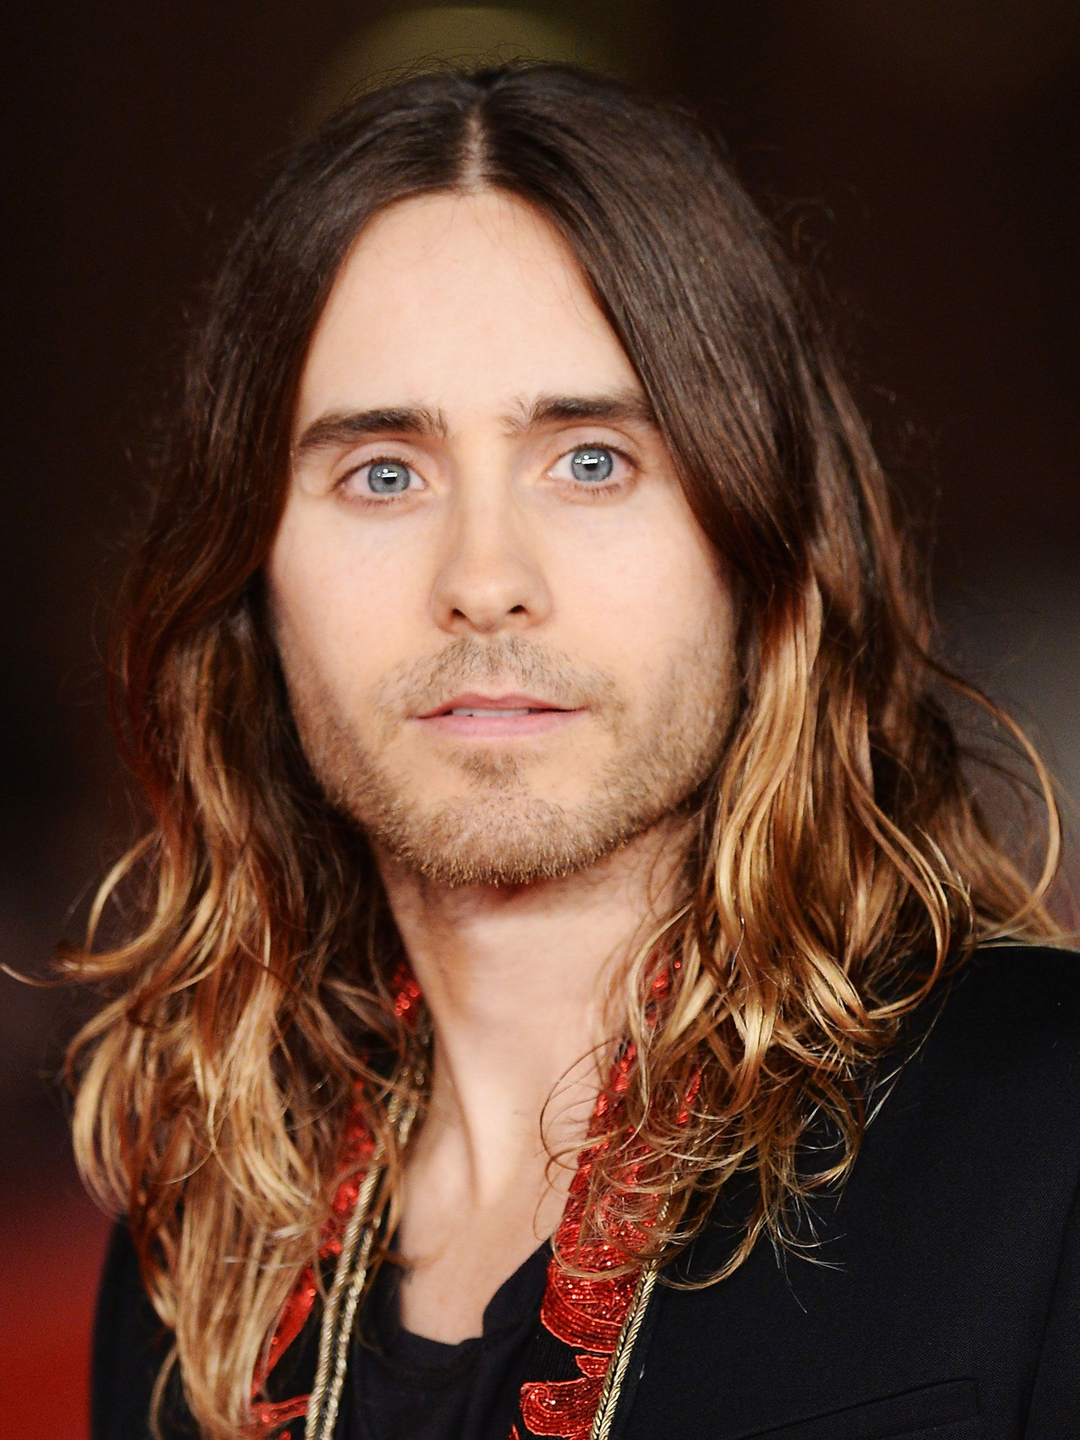 Jared Leto who are his parents